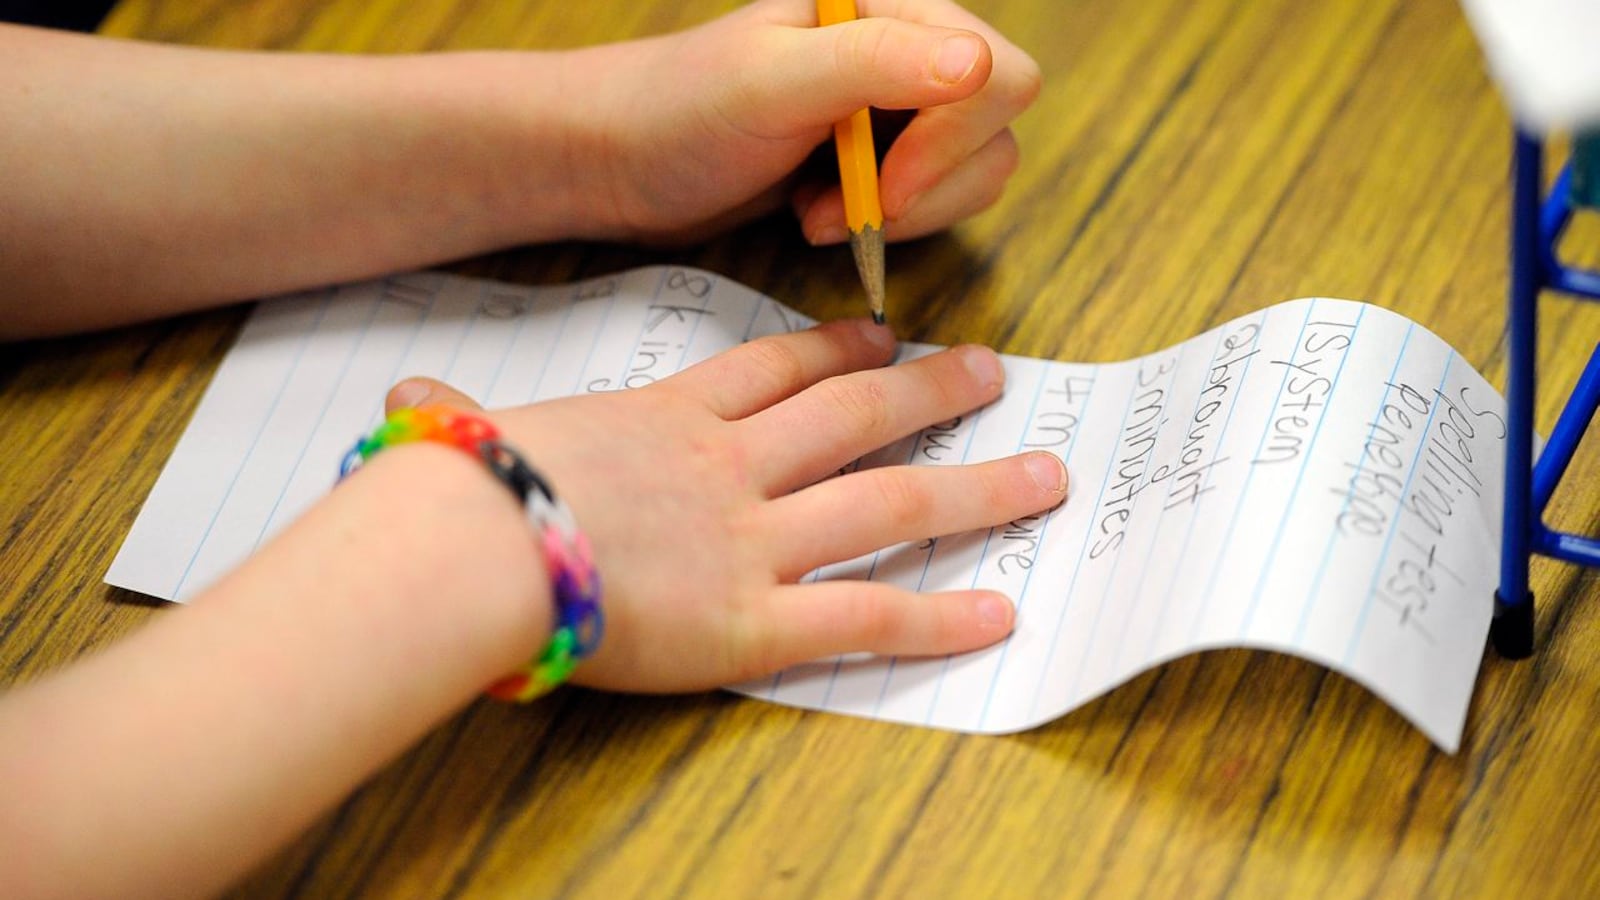 A close-up of a young student's hands as they work on a spelling test.